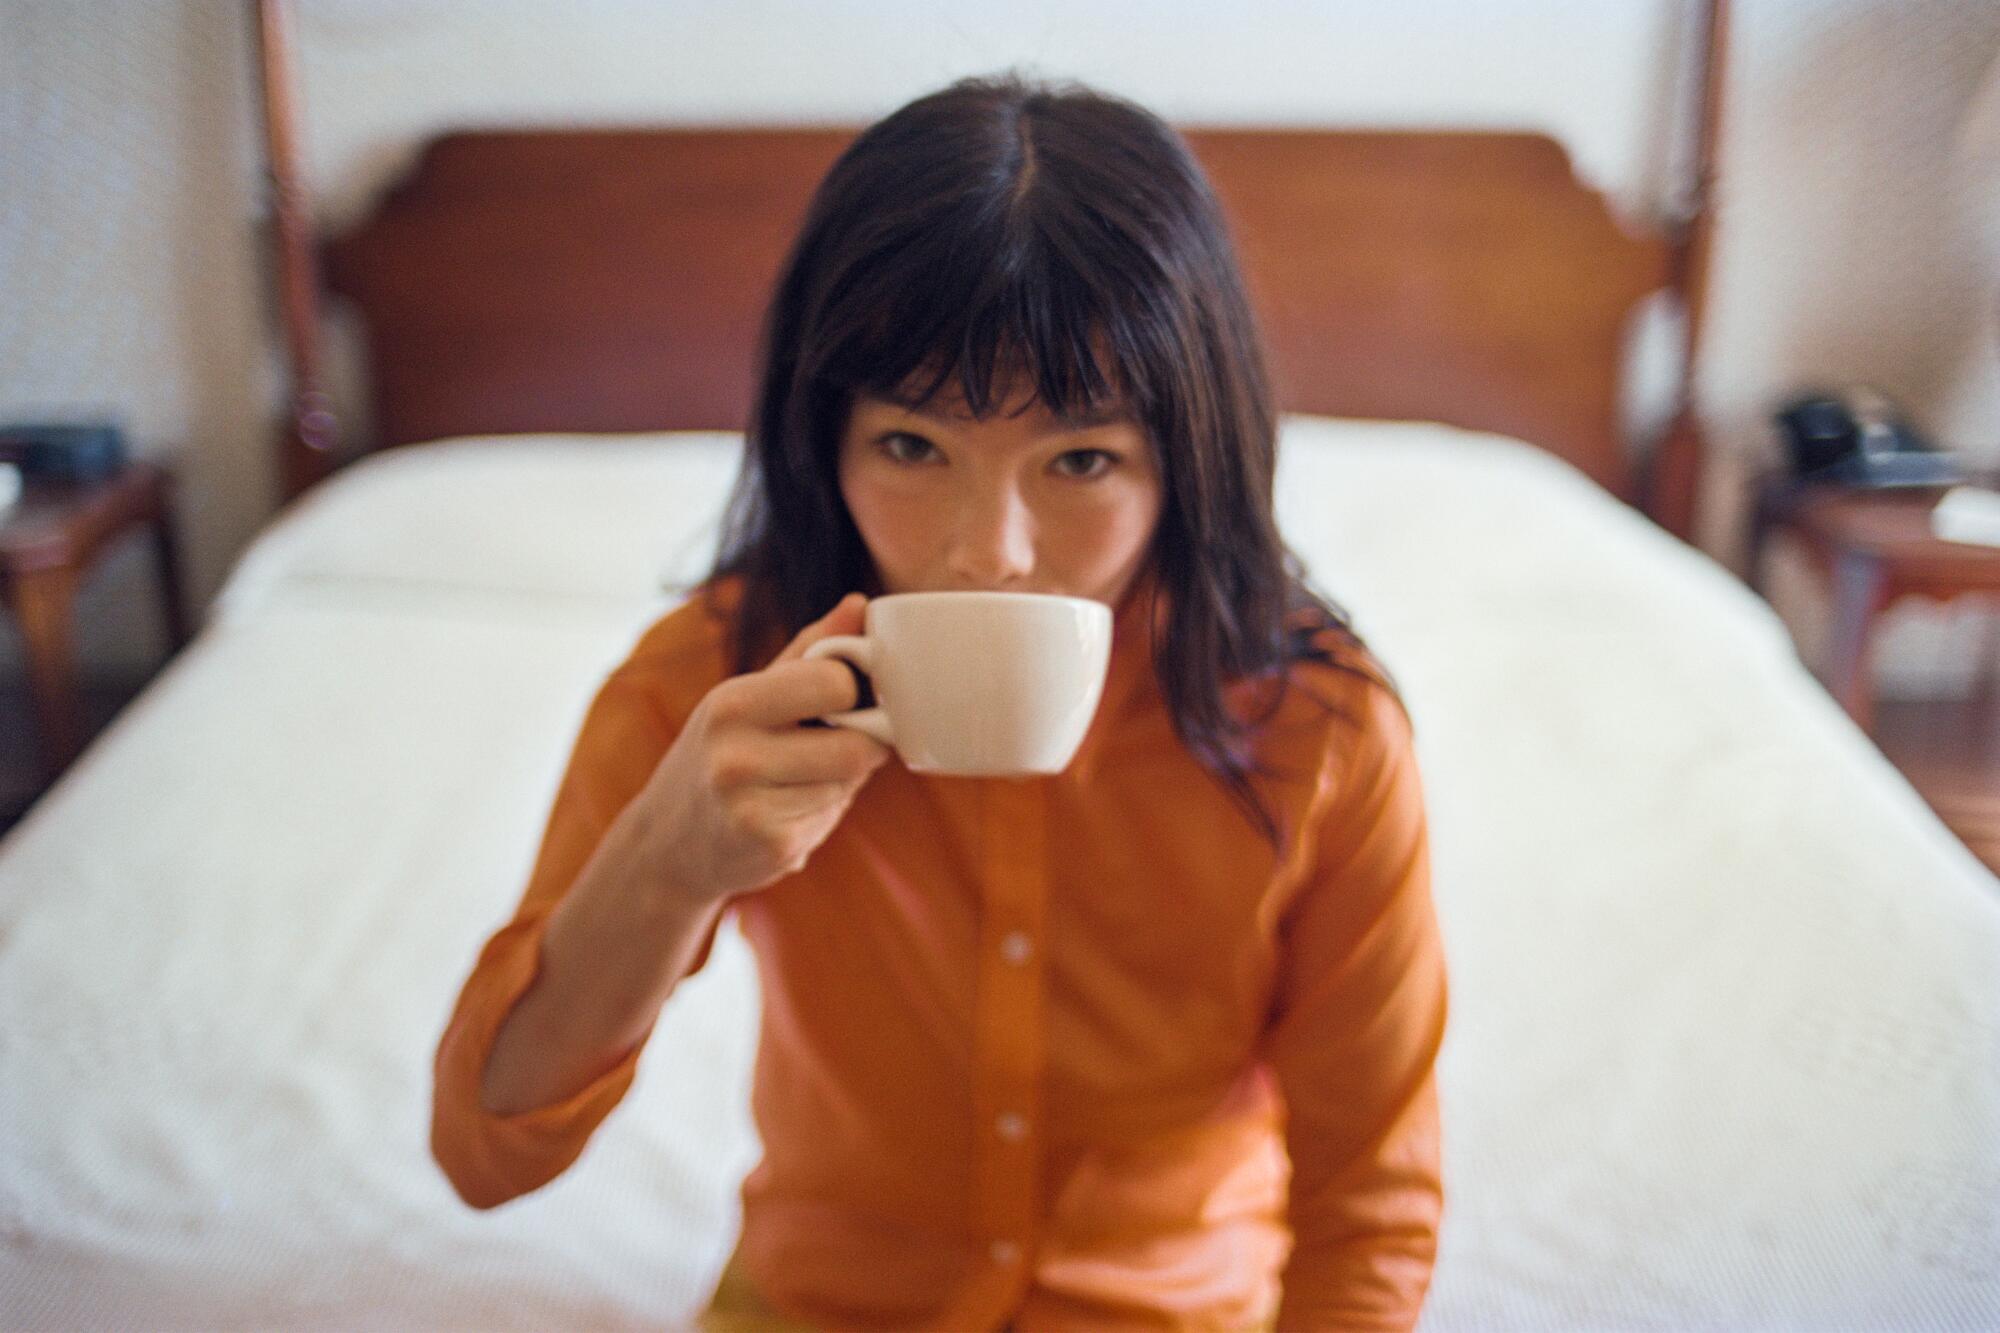 Björk is sitting on the edge of a bed, wearing an orange sweater and drinking from a cup of latte.